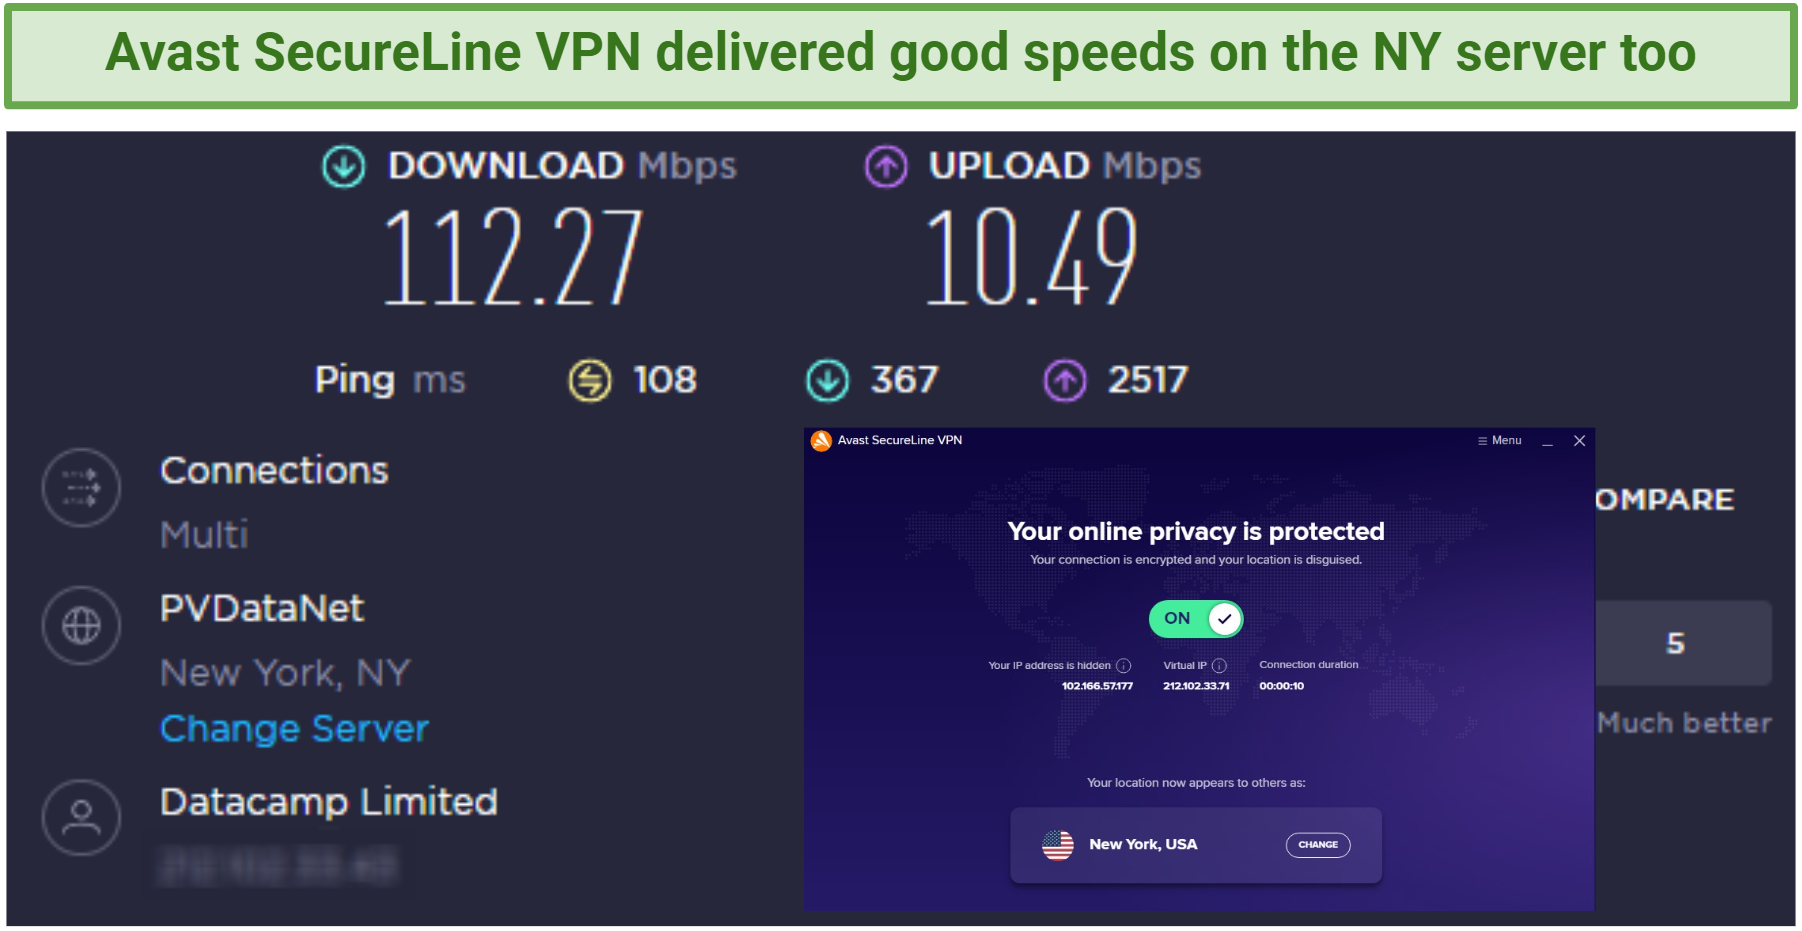 A screenshot of Avast SecureLine VPN speed test while connected to New York servers